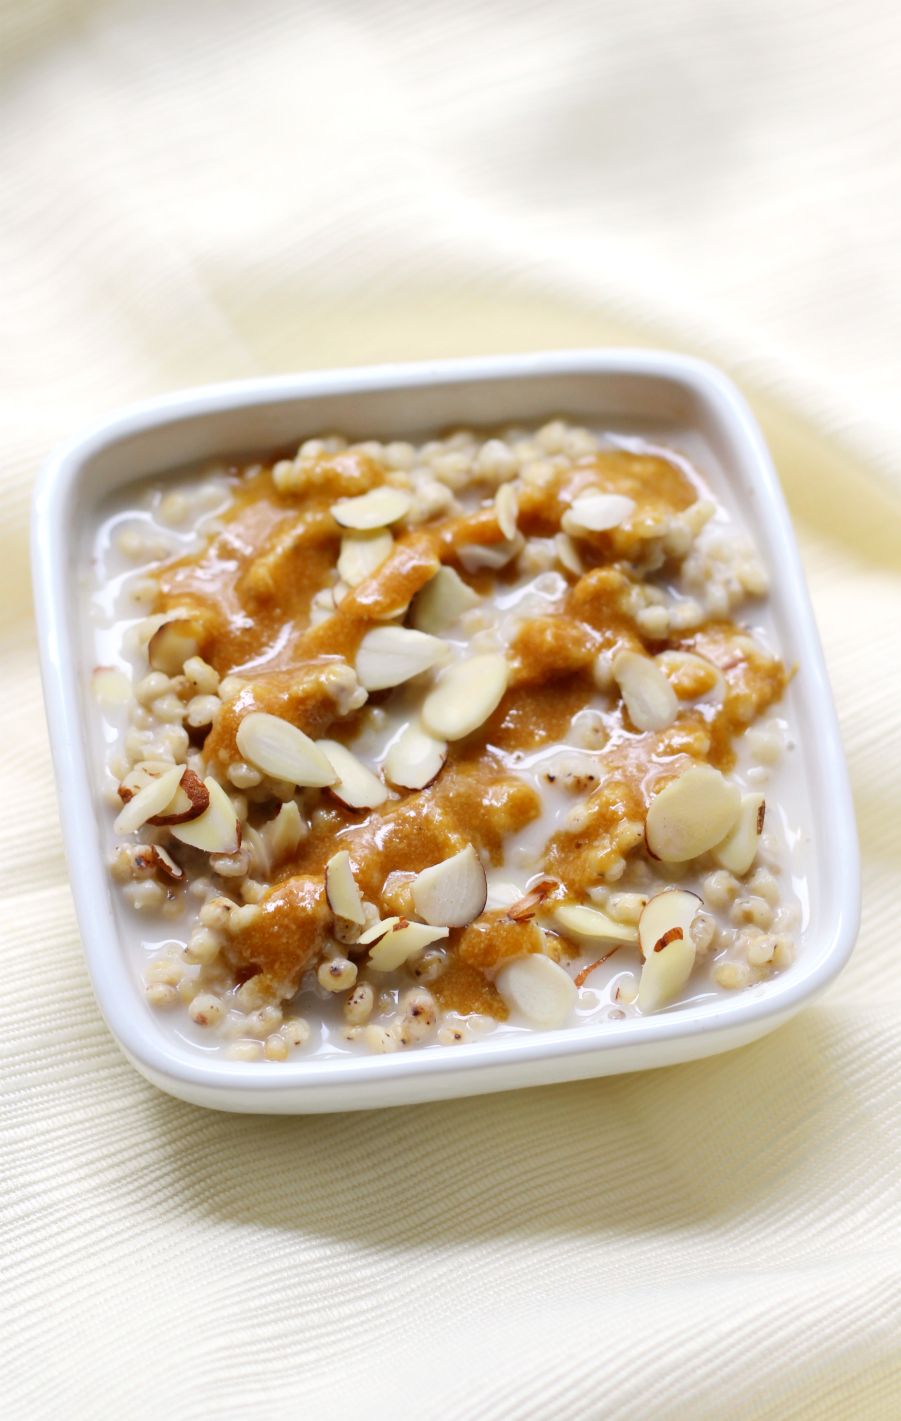 Caramel Almond Sorghum Porridge | Strength and Sunshine @RebeccaGF666 A delicious, healthy, whole grain breakfast porridge that's gluten-free and vegan. This Caramel Almond Sorghum Porridge will put your typical oatmeal to shame!